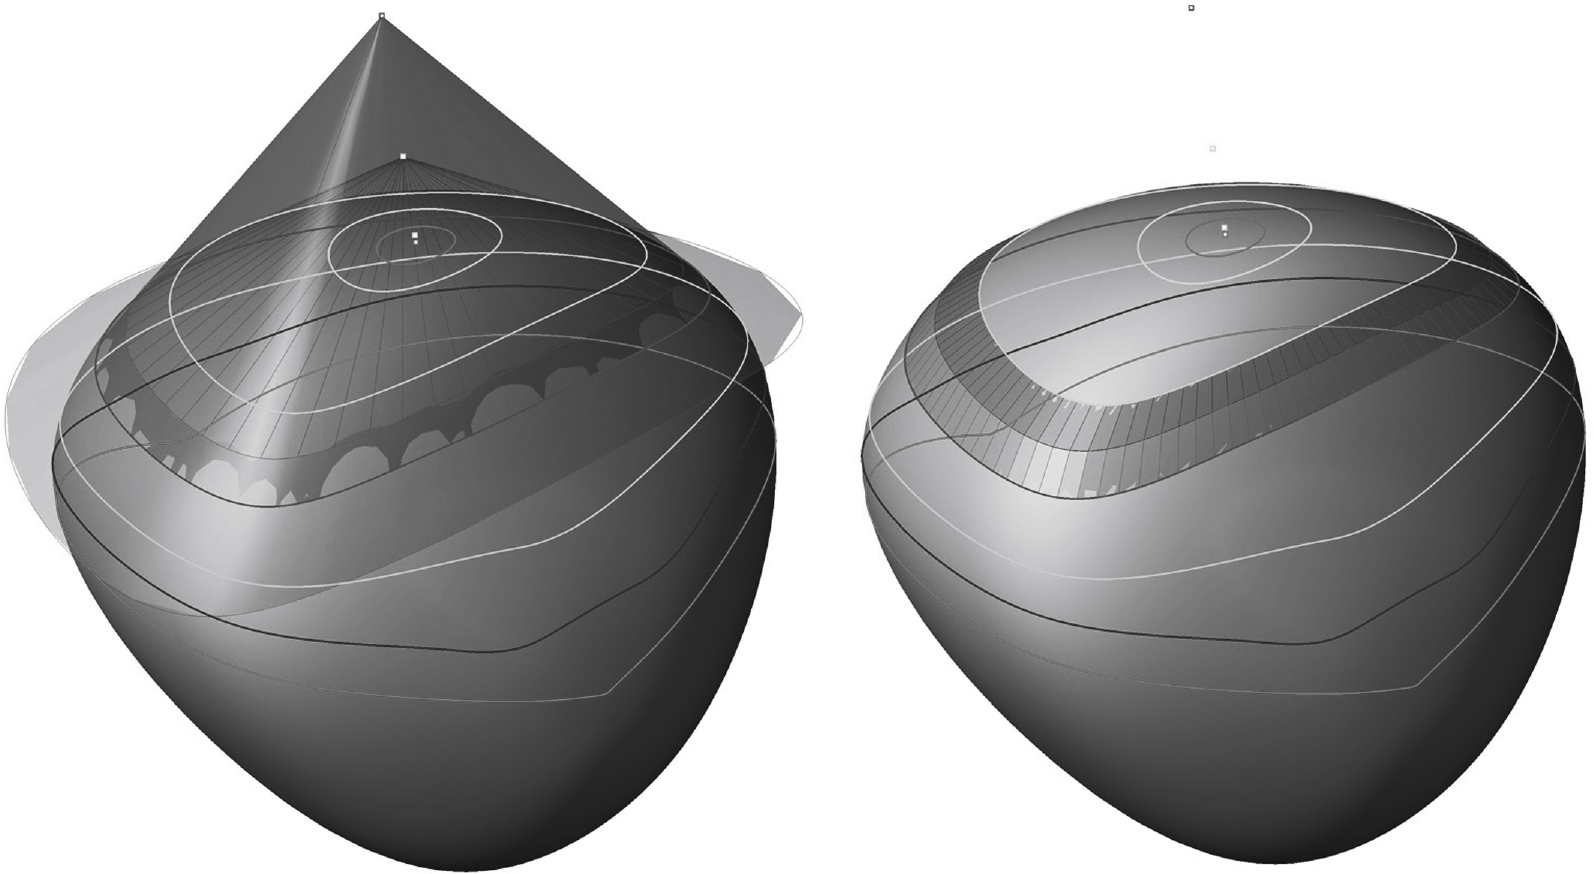 Contours obtained using proper straight trajectory, projecting conical surfaces.